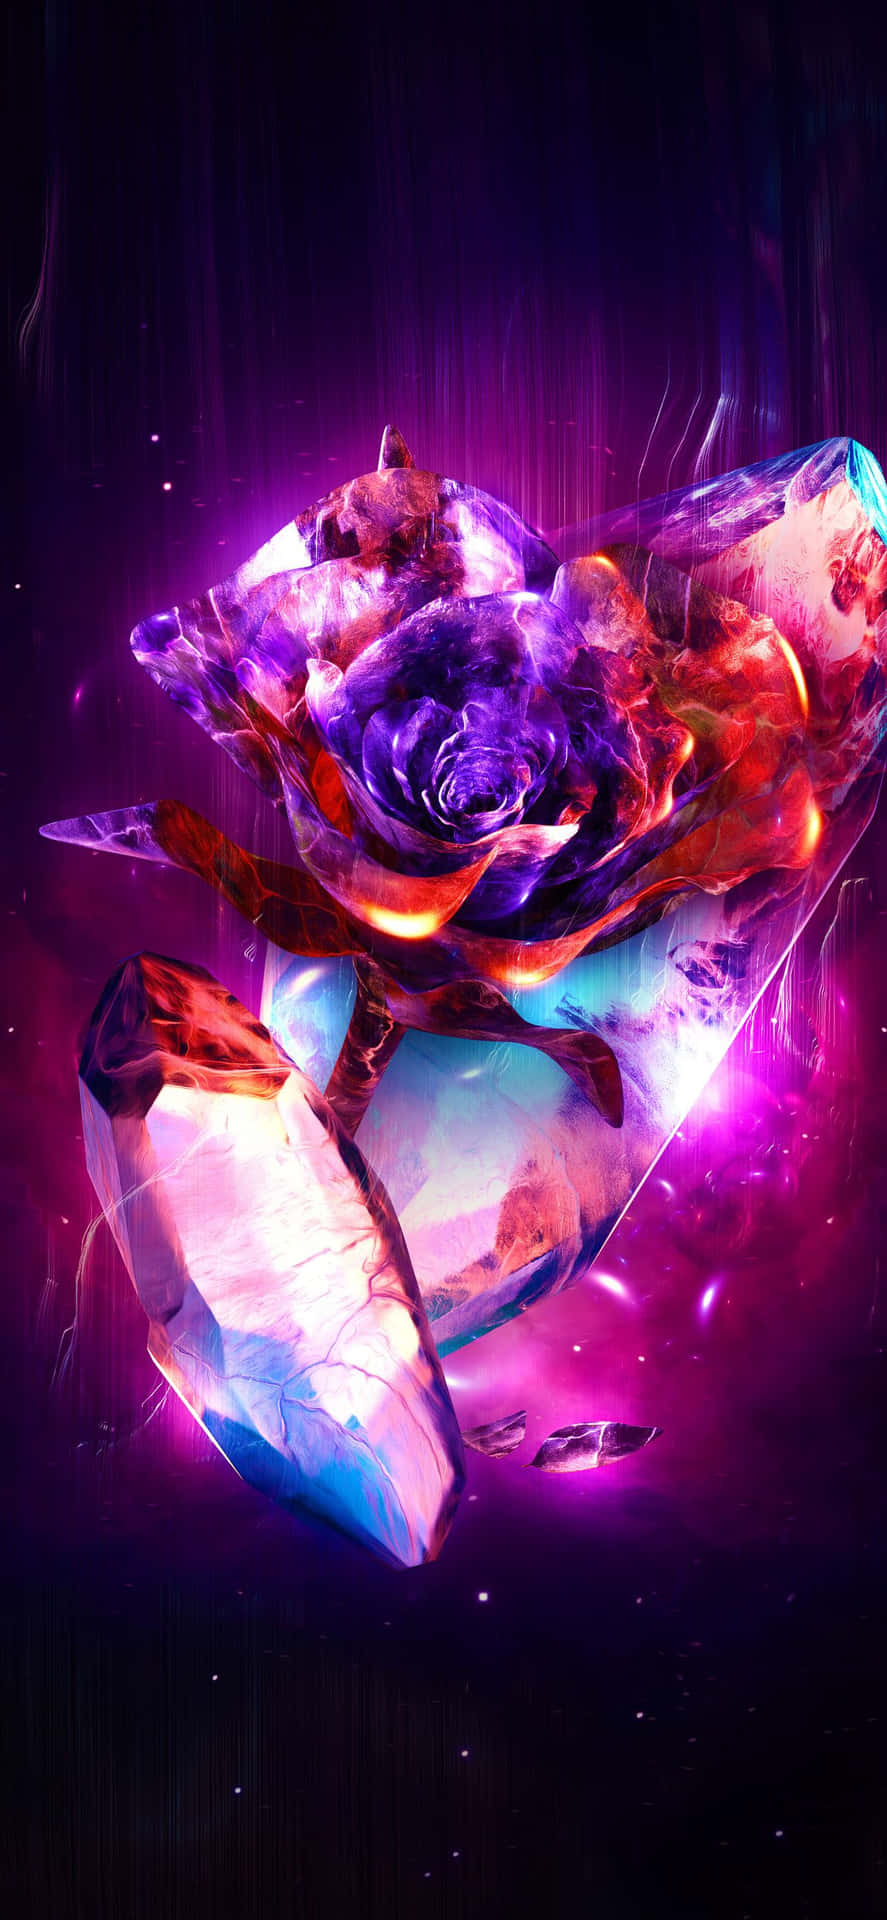 An Incredible View of a Cool Rose Wallpaper